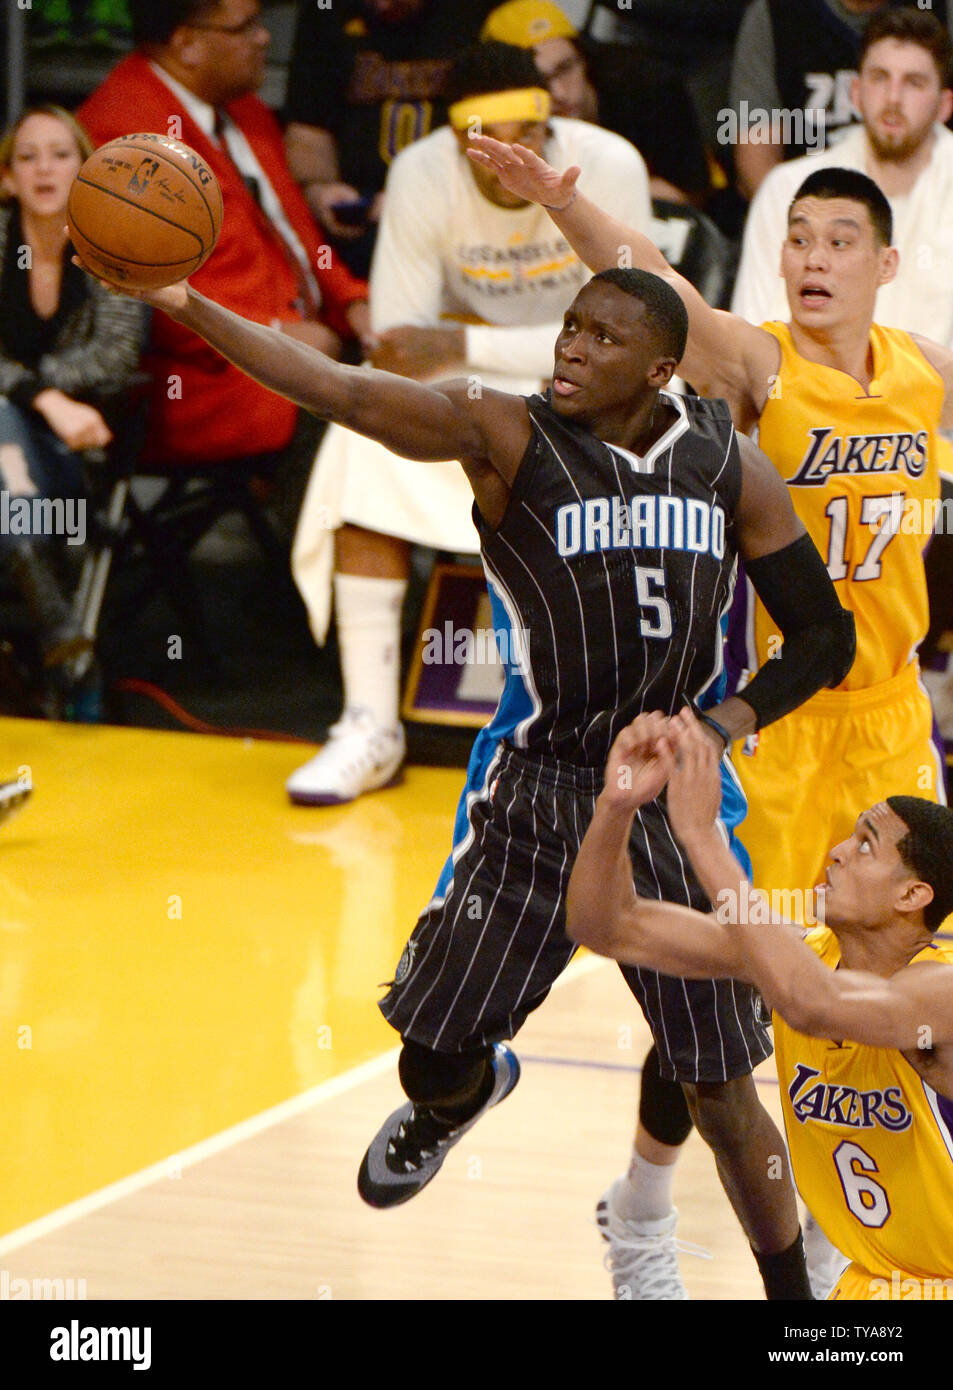 Orlando Magic guard Victor Oladipo(5) scores past Los Angeles Lakers guard Jeremy Lin (17) during the first half of their NBA game at Staples Center in Los Angeles, January 9, 2015. The Lakers beat the Magic 101-84.   UPI/Jon SooHoo Stock Photo